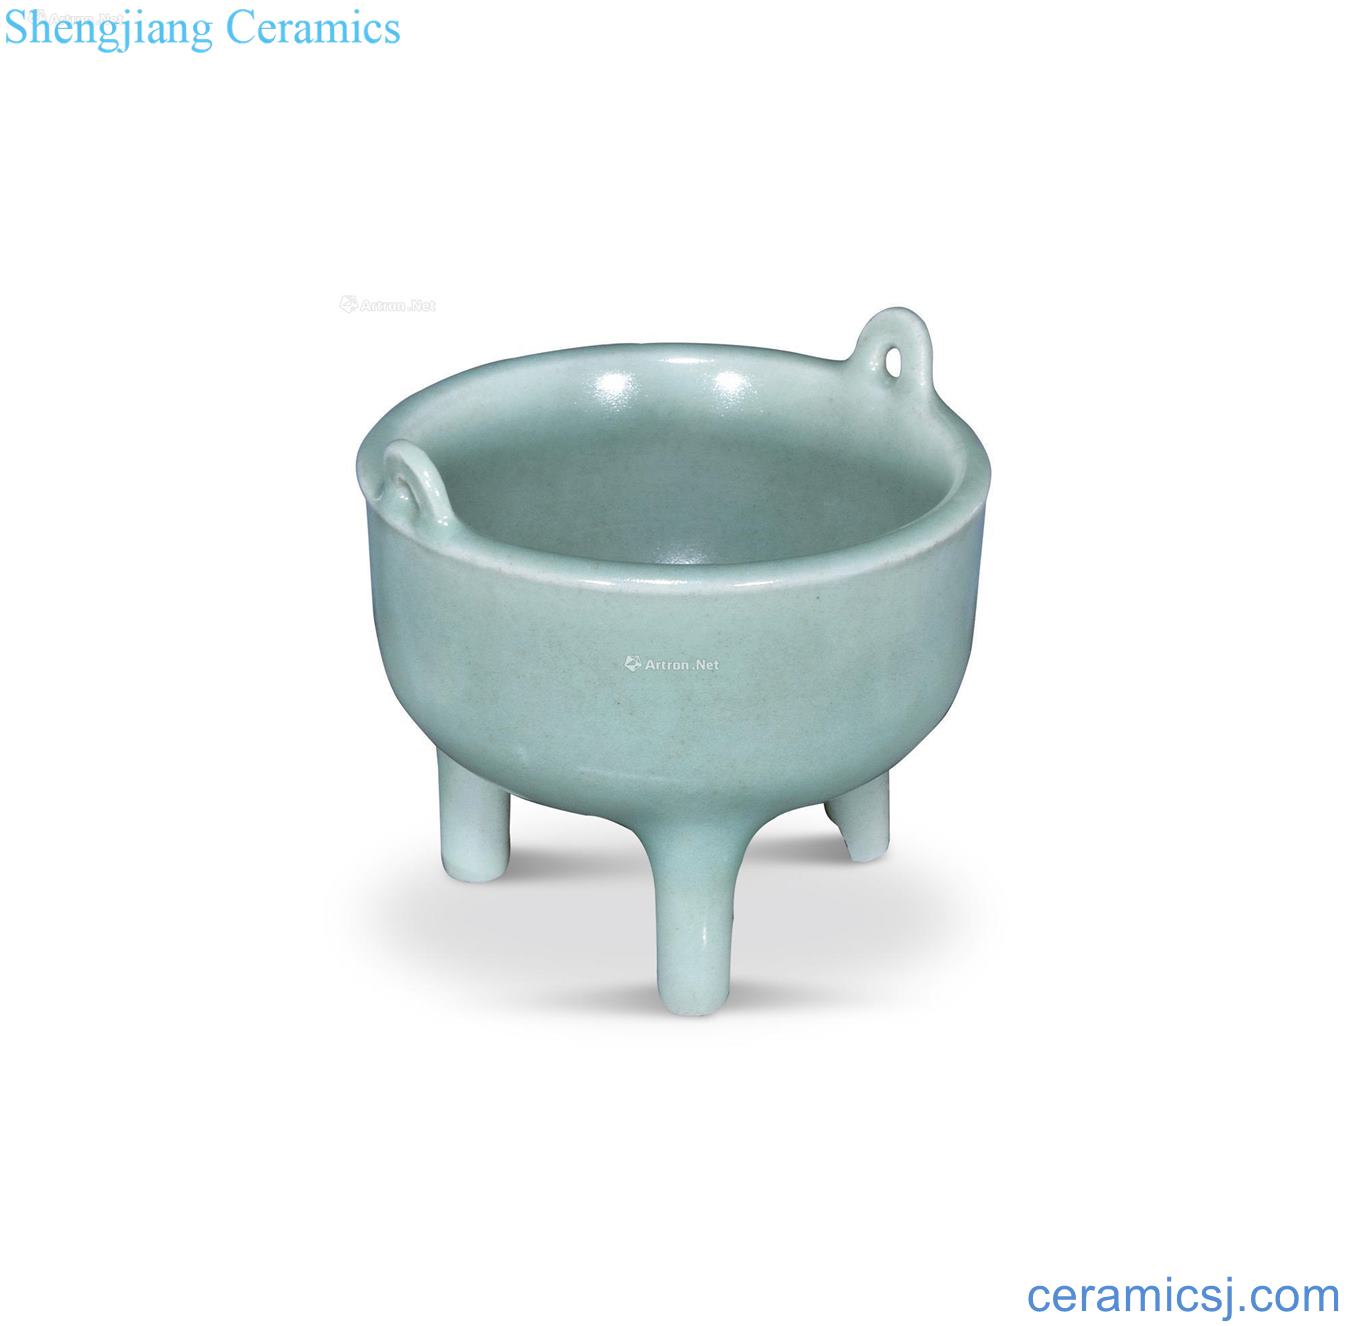 The southern song dynasty Your kiln furnace with three legs